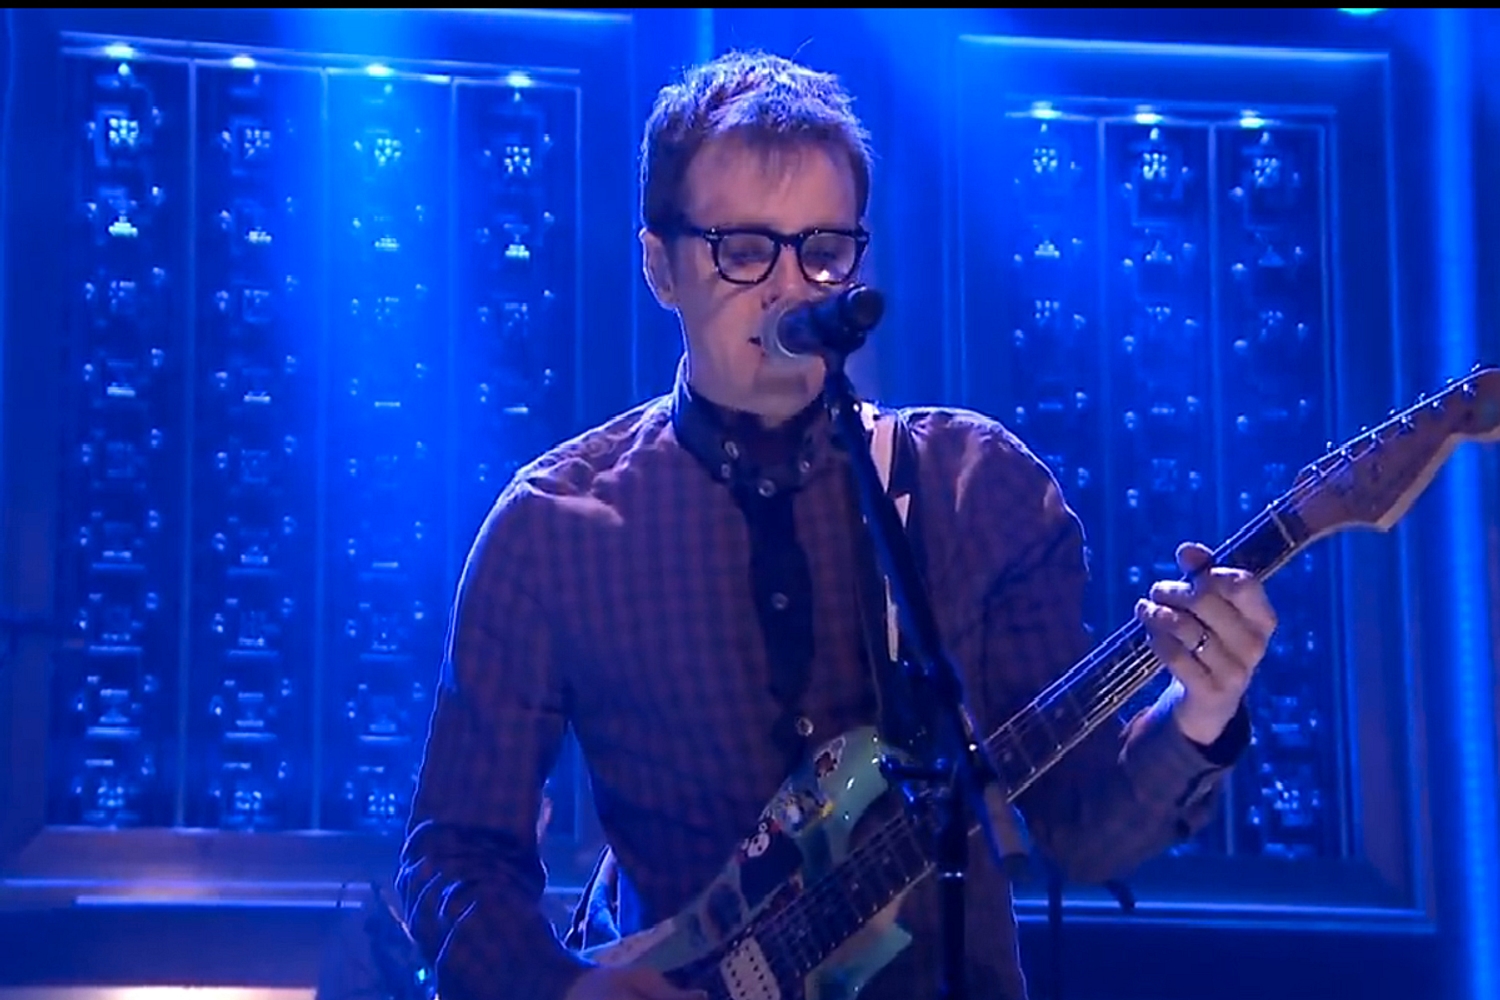 Watch Weezer play ‘Back to the Shack’ on Jimmy Fallon